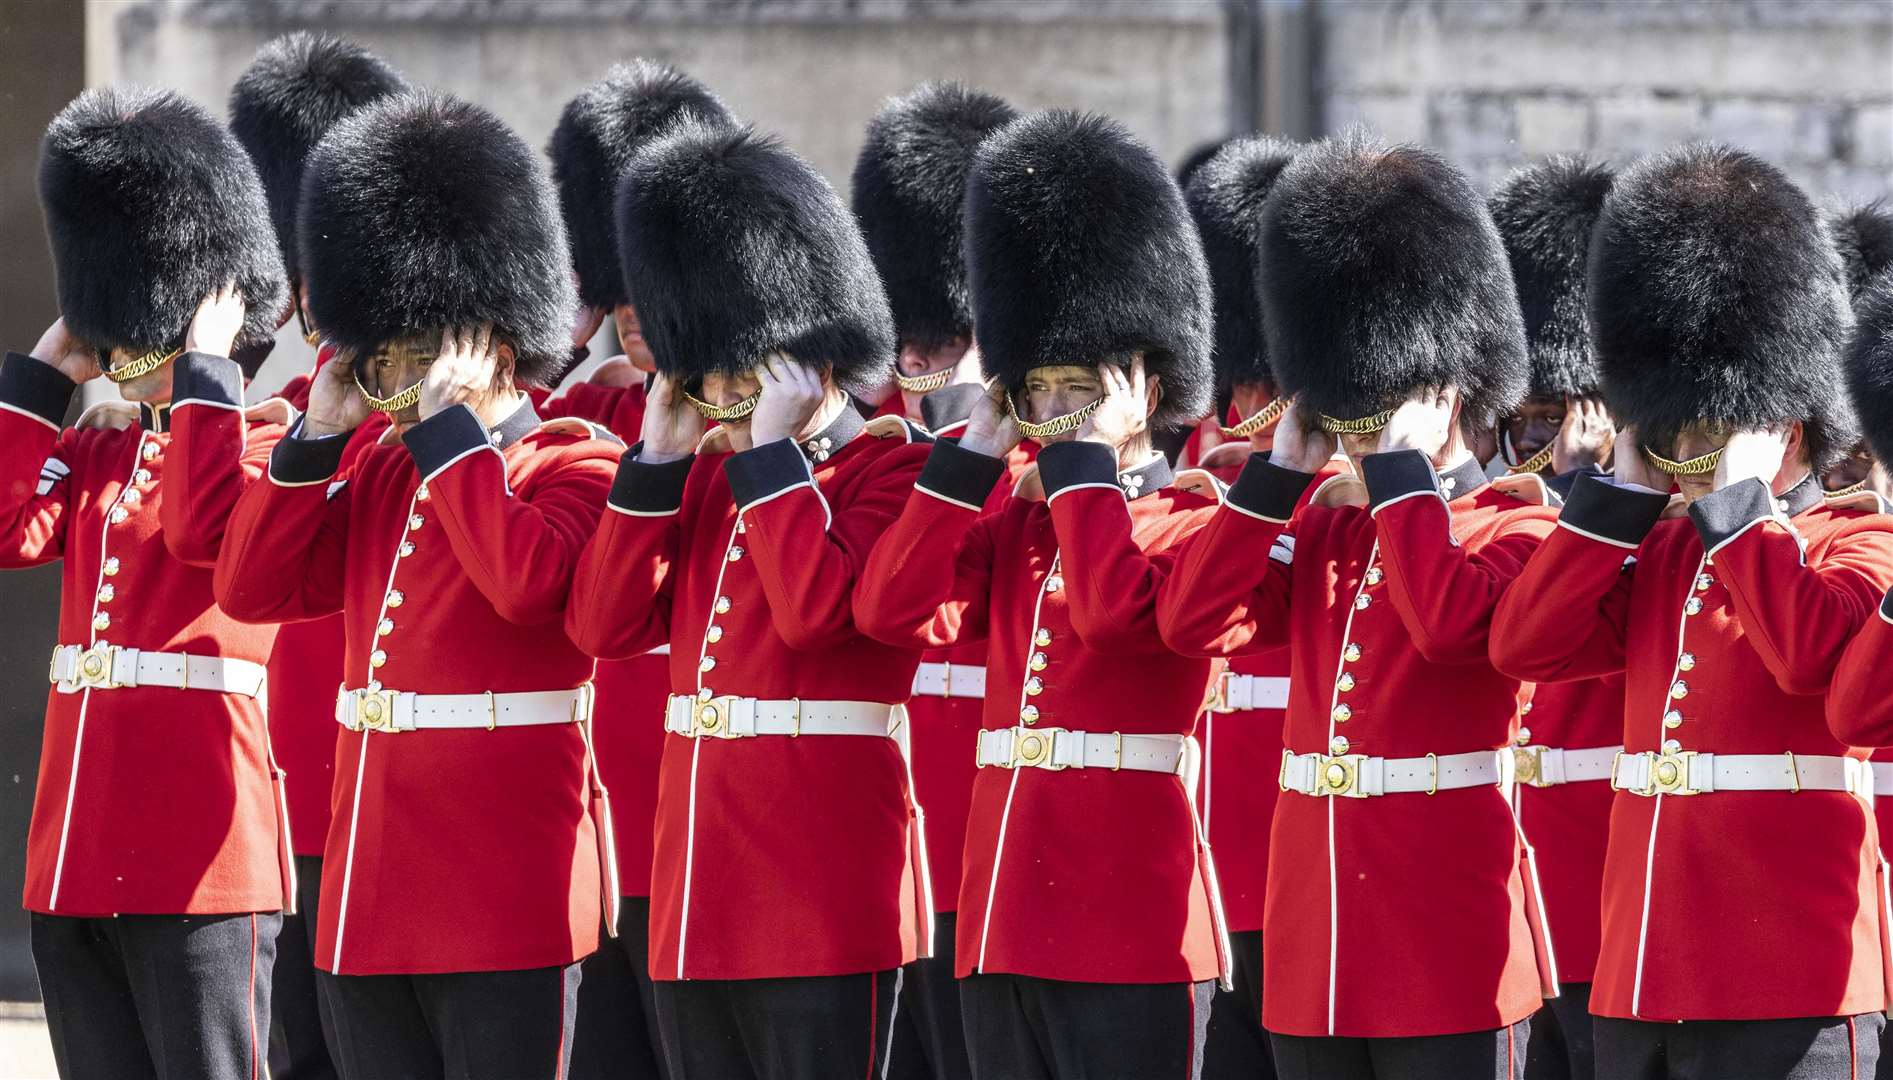 Guardsmen of the 1st battalion Irish guards remove their ceremonial bearskin hats during a parade at Windsor Castle (Richard Pohle/The Times/PA)